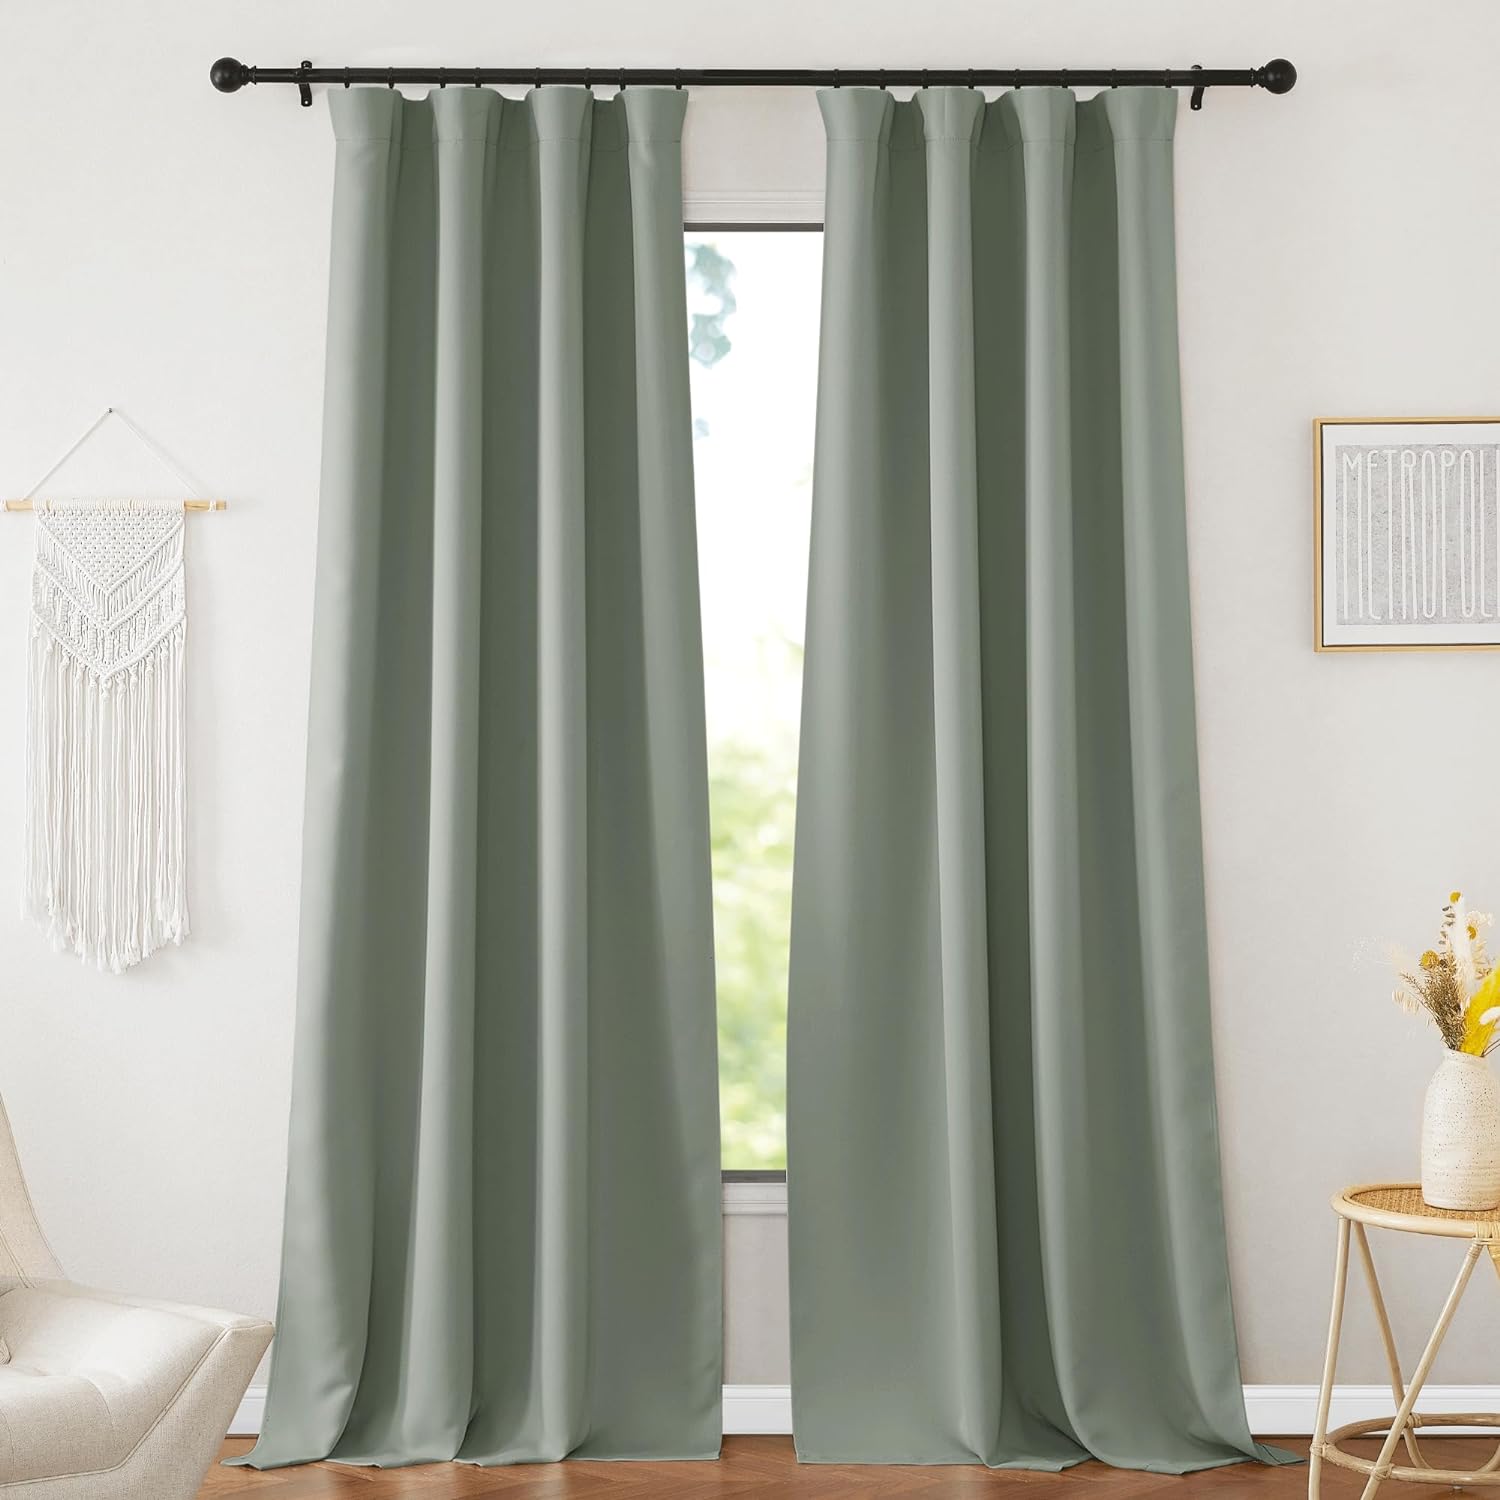 nicetown sage green blackout curtains 95 inches long 2 panels pinch pleated thermal curtain sound proof thick window dra